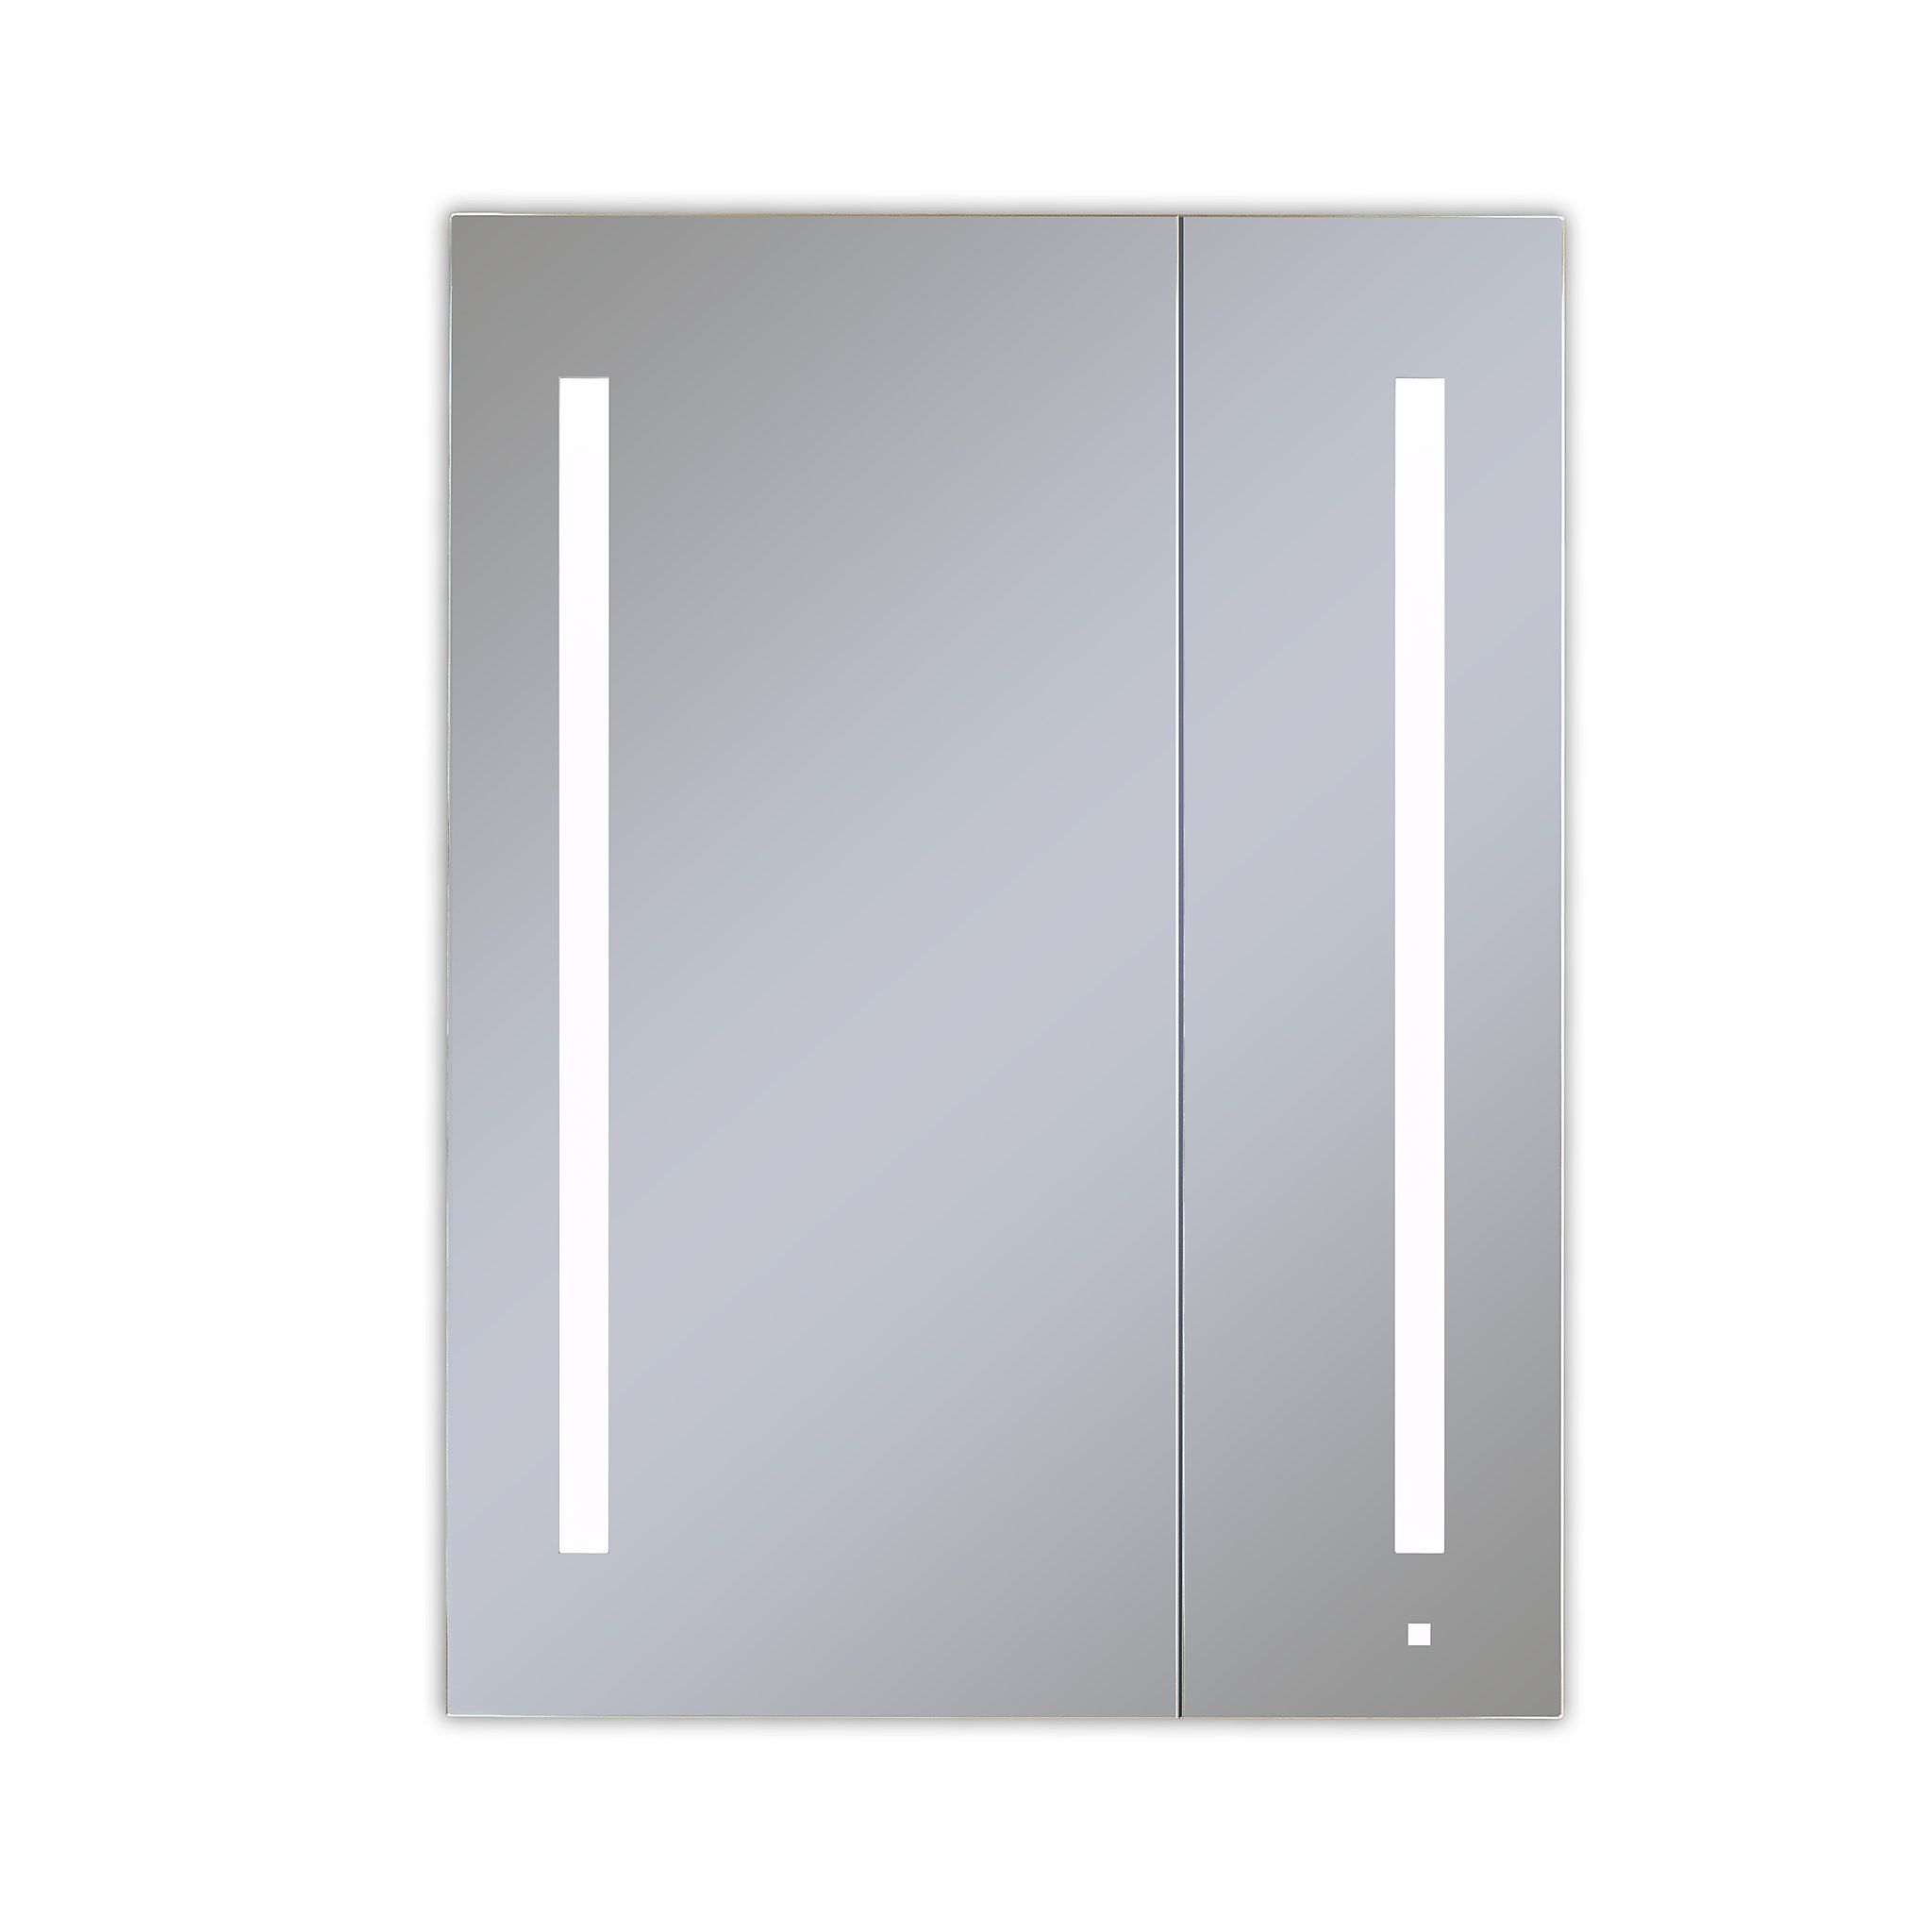 Robern AC3040D4P2LA AiO Lighted Cabinet, 30" x 40" x 4", Two Door, LUM Lighting, 4000K Temperature (Cool Light), Dimmable, OM Au